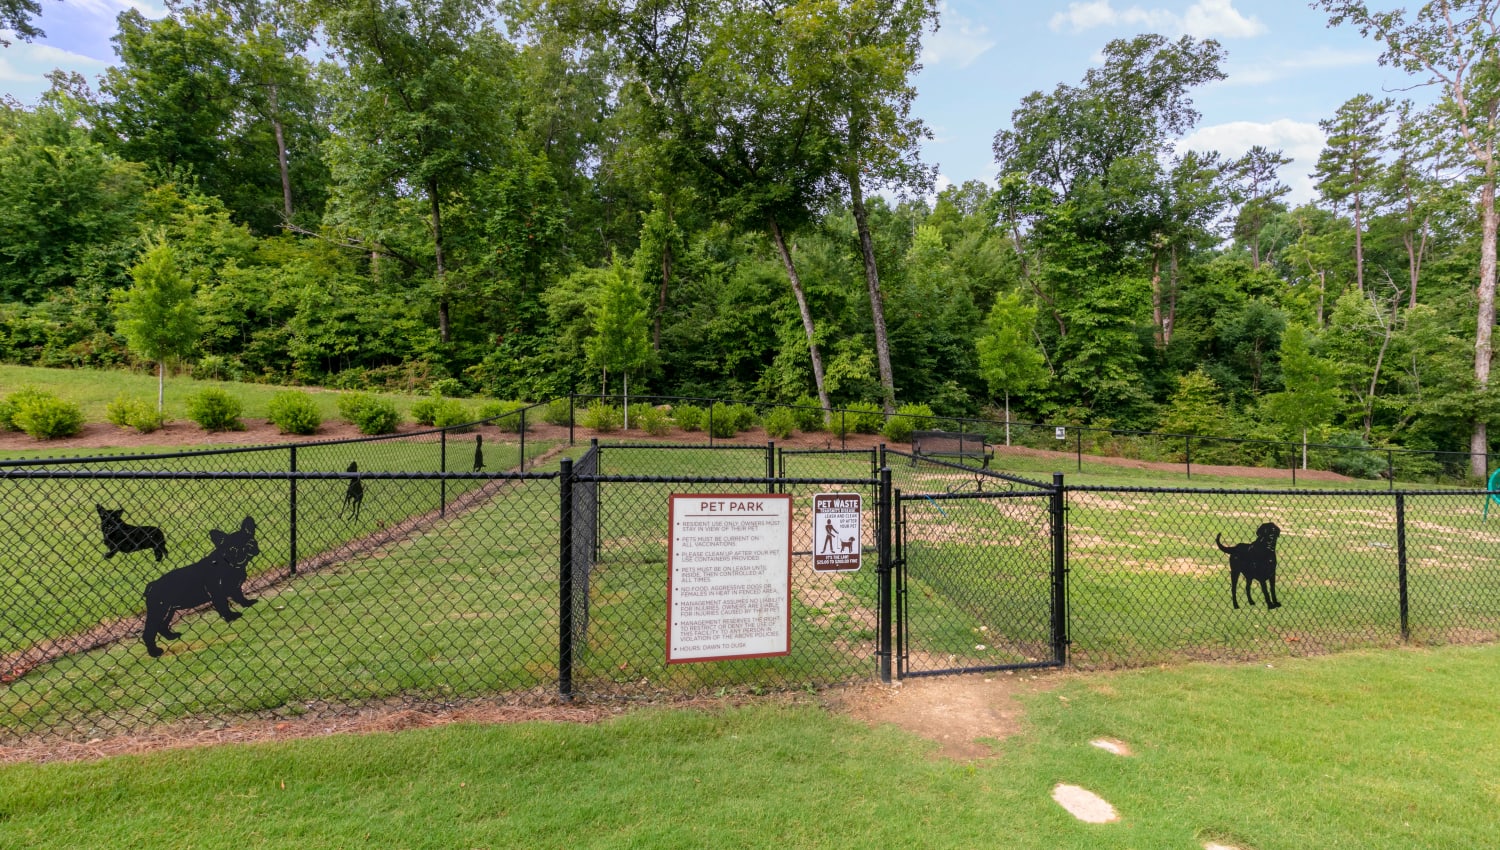 Onsite fenced dog park at The Village at Apison Pike in Ooltewah, Tennessee